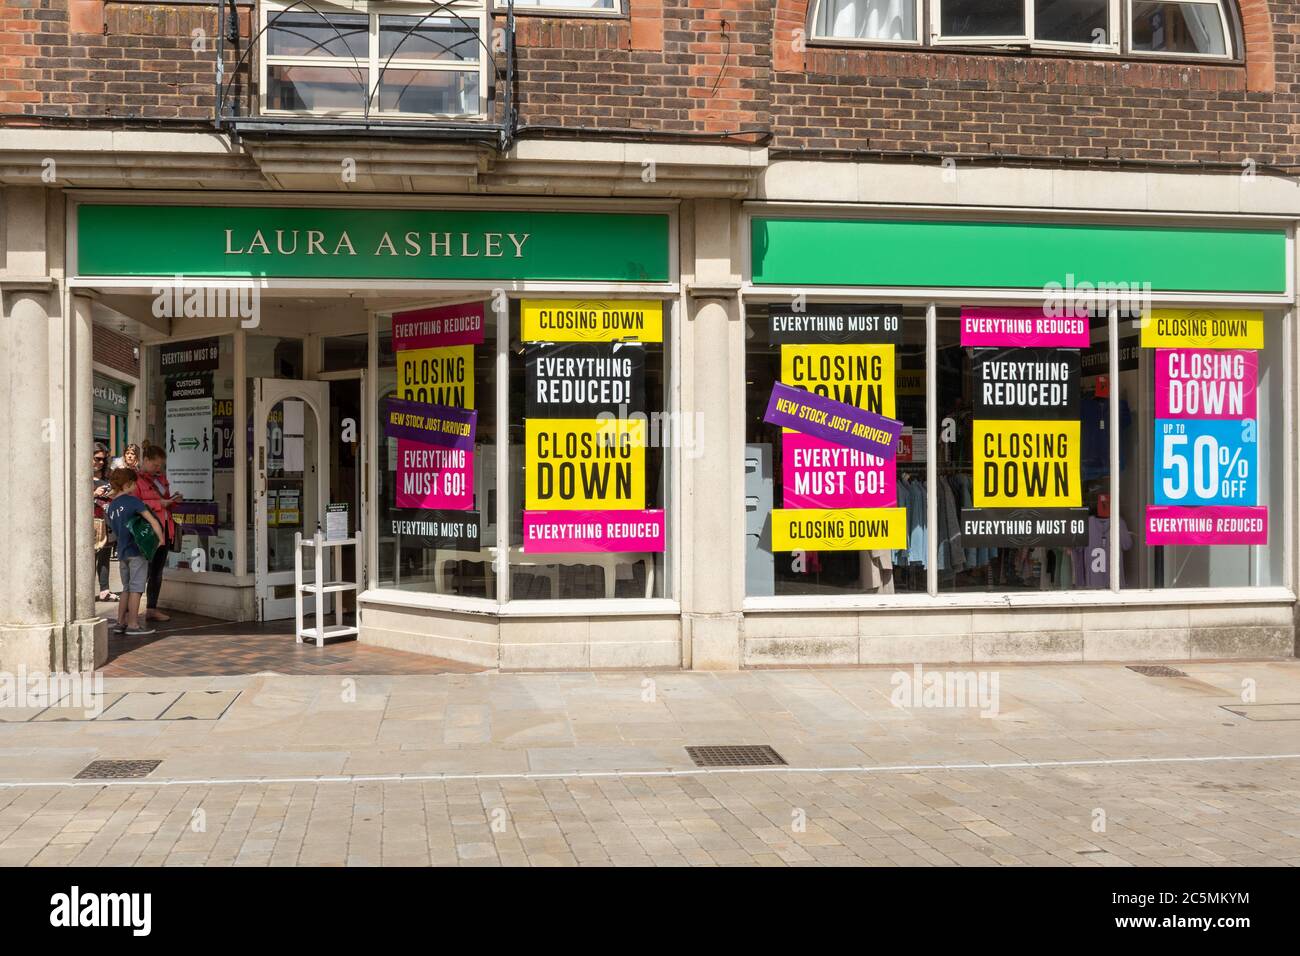 Laura Ashley shop with closing down posters during the coronavirus covid-19 pandemic, July 2020, Winchester High Street, Hampshire, UK Stock Photo